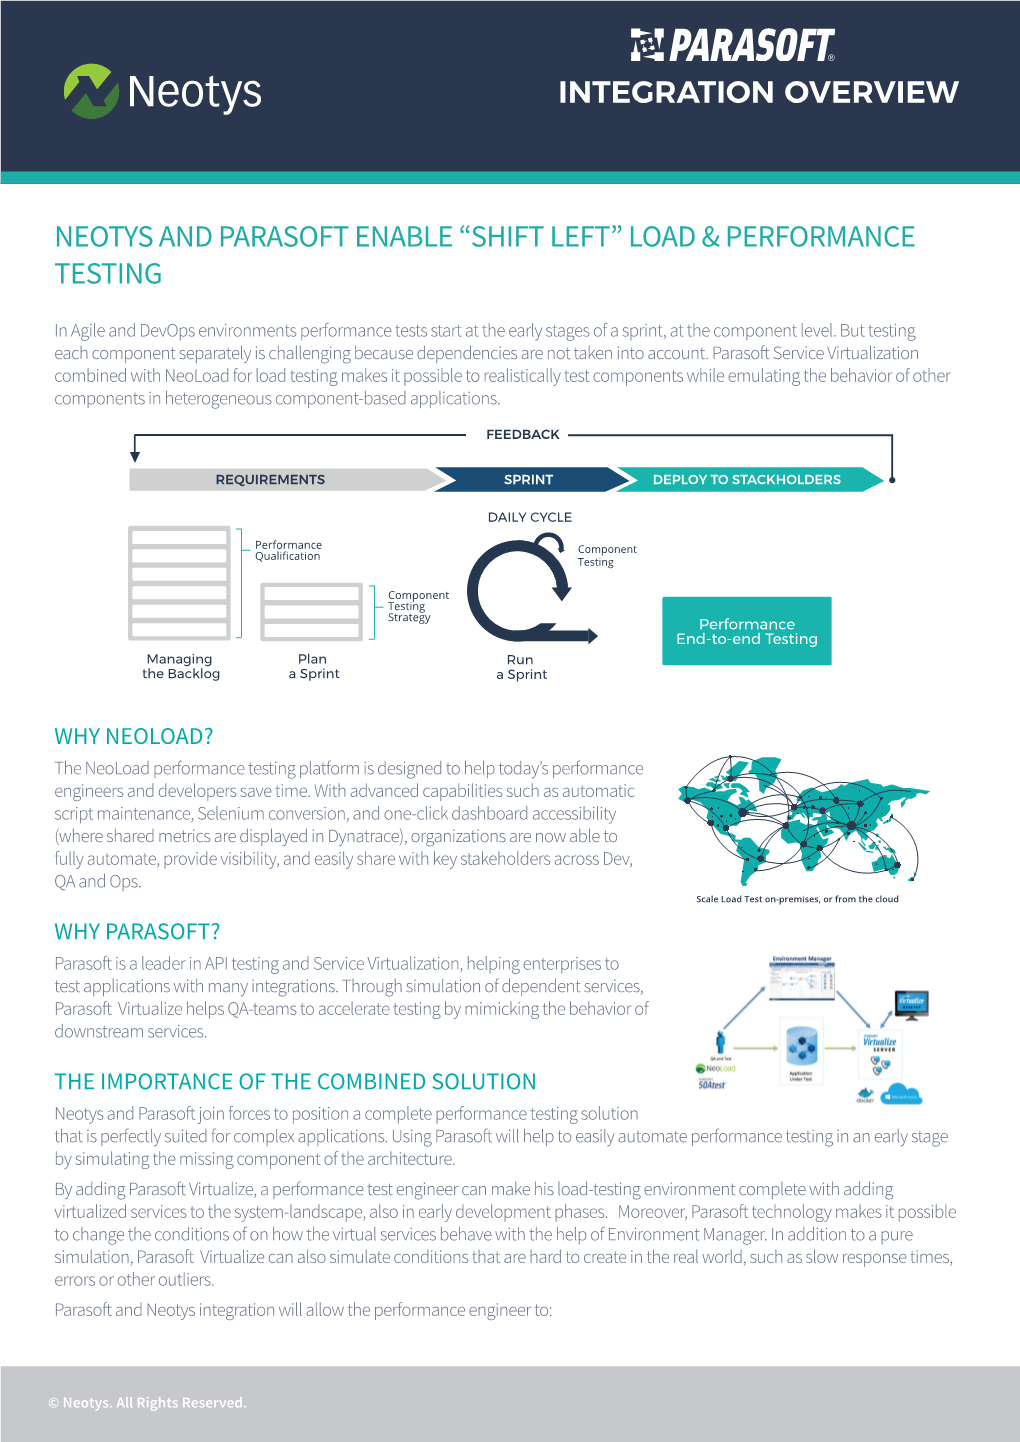 Integration Overview Neotys and Parasoft Enable “Shift